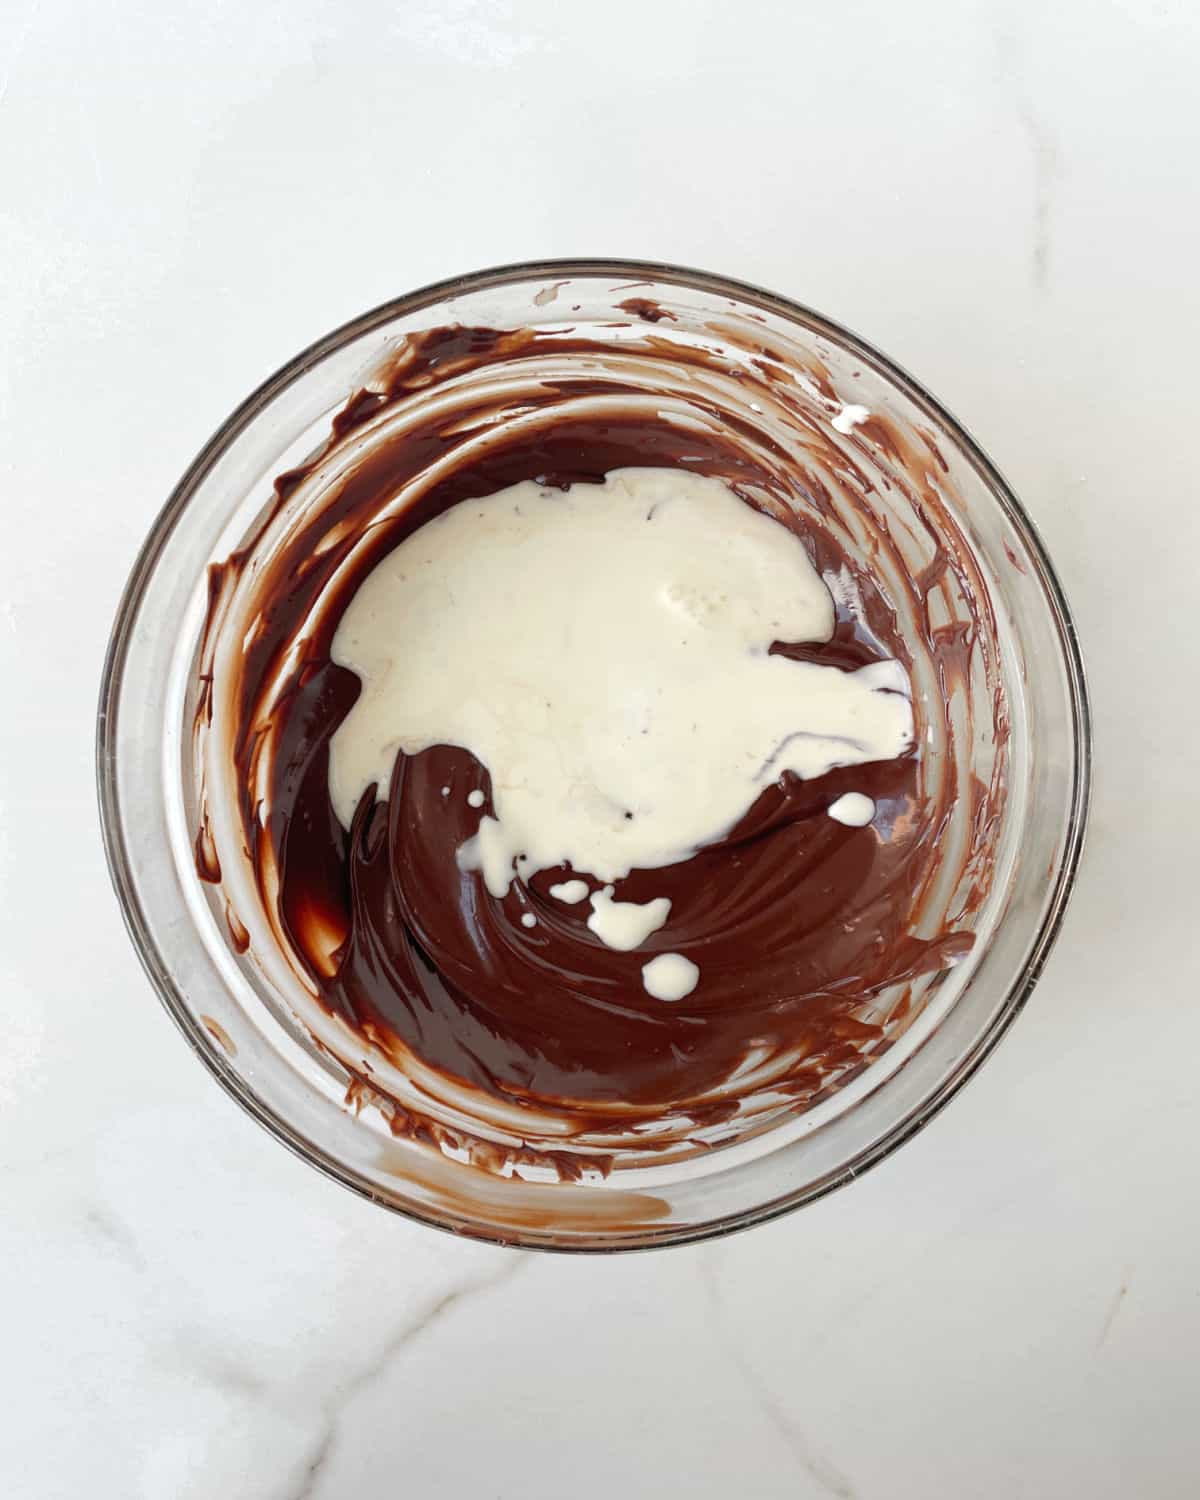 Glass bowl with melted chocolate and splash of cream on a white surface.